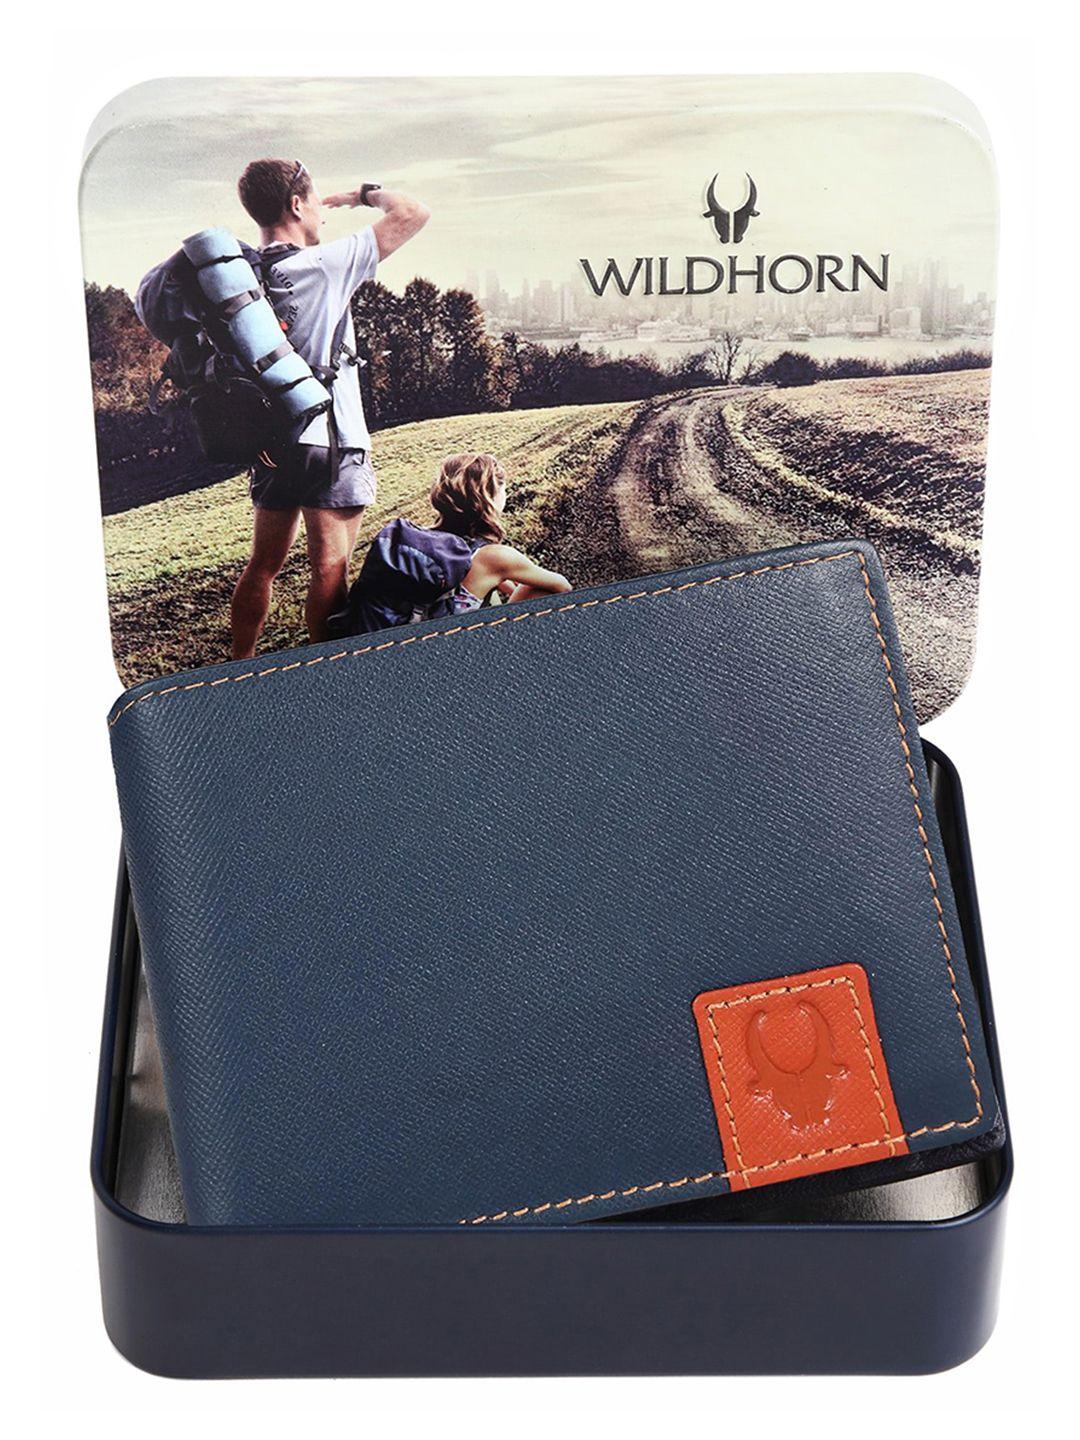 wildhorn men rfid blue textured leather two fold wallet